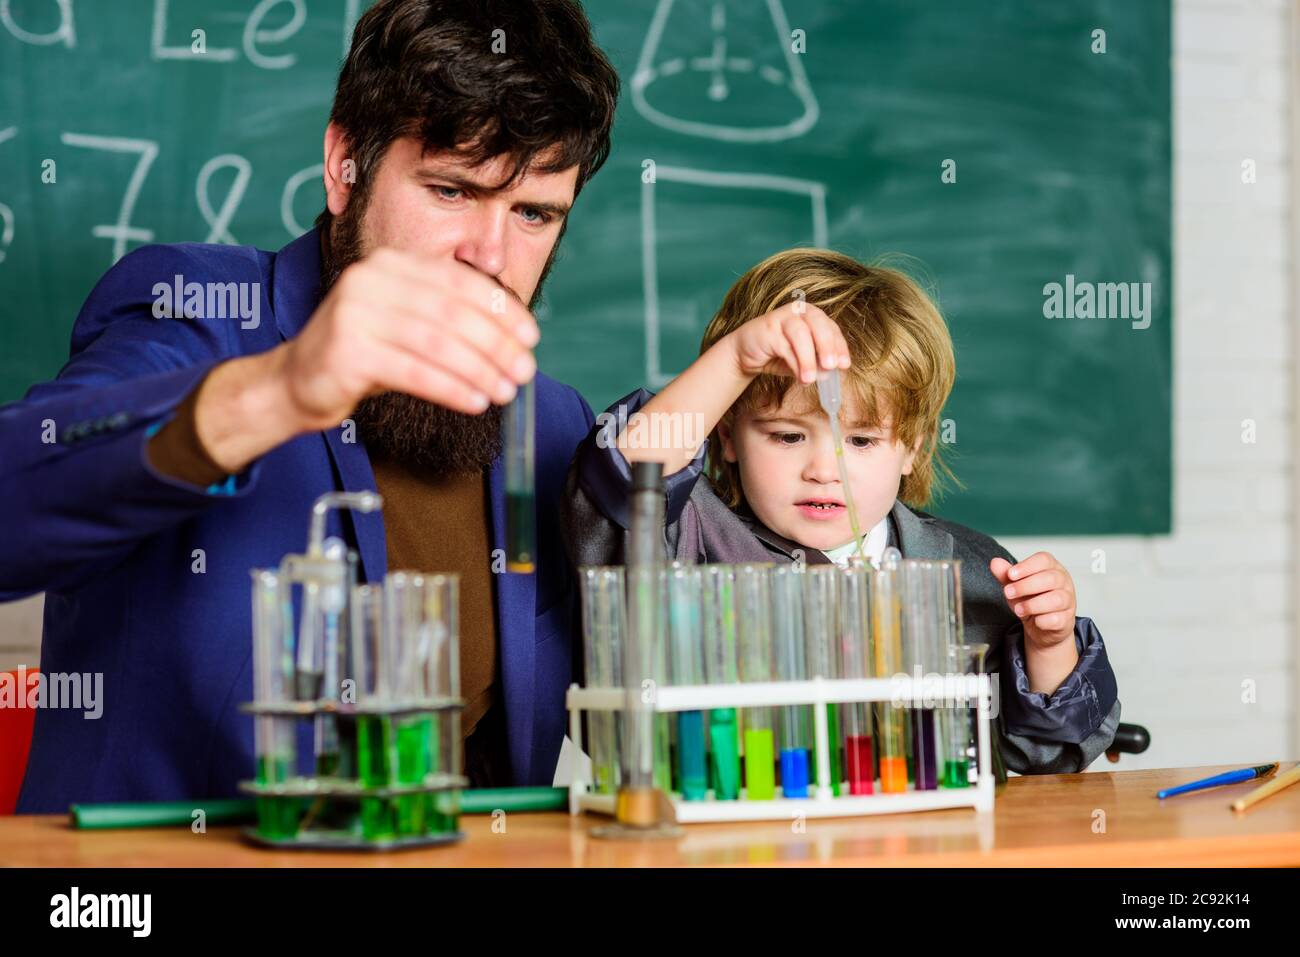 Educational school program. Schoolboy cute child experimenting with liquids. Teacher and child test tubes. School lesson. Perseverance pays off. Chemical experiment. Symptoms of ADHD at school. Stock Photo